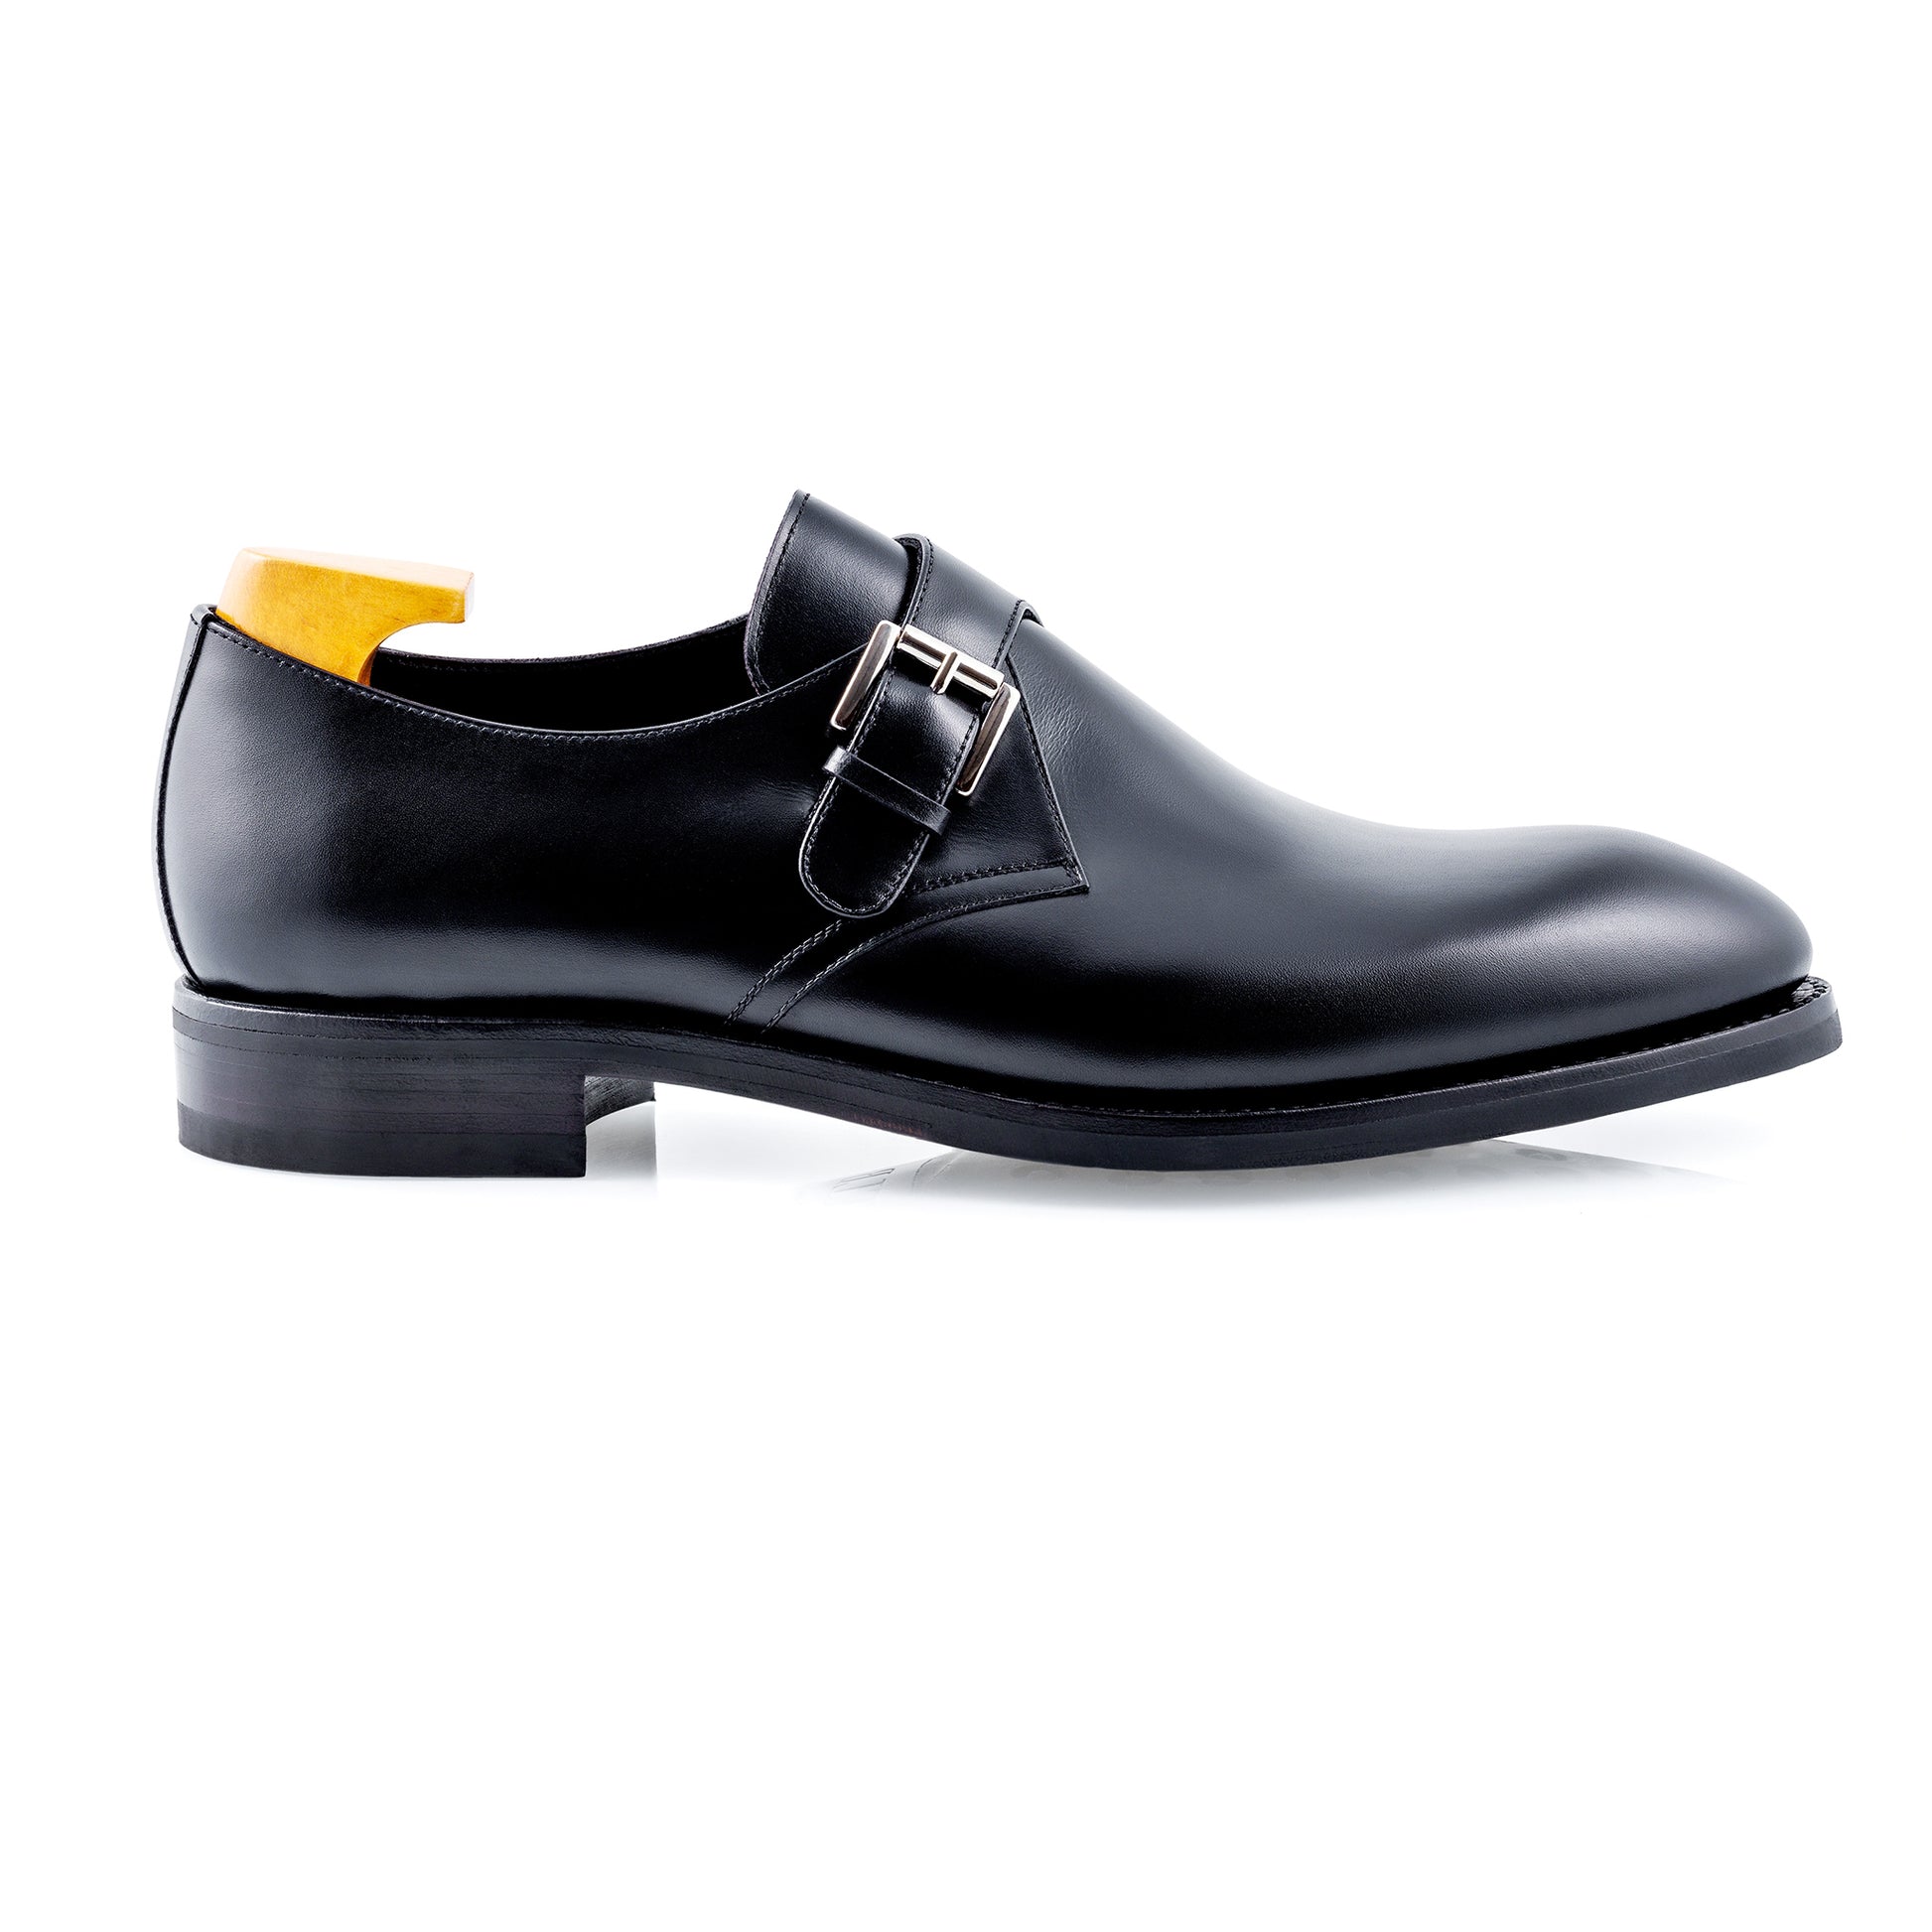 TLB Mallorca leather shoes 543 / OLIVER / BOXCALF BLACK